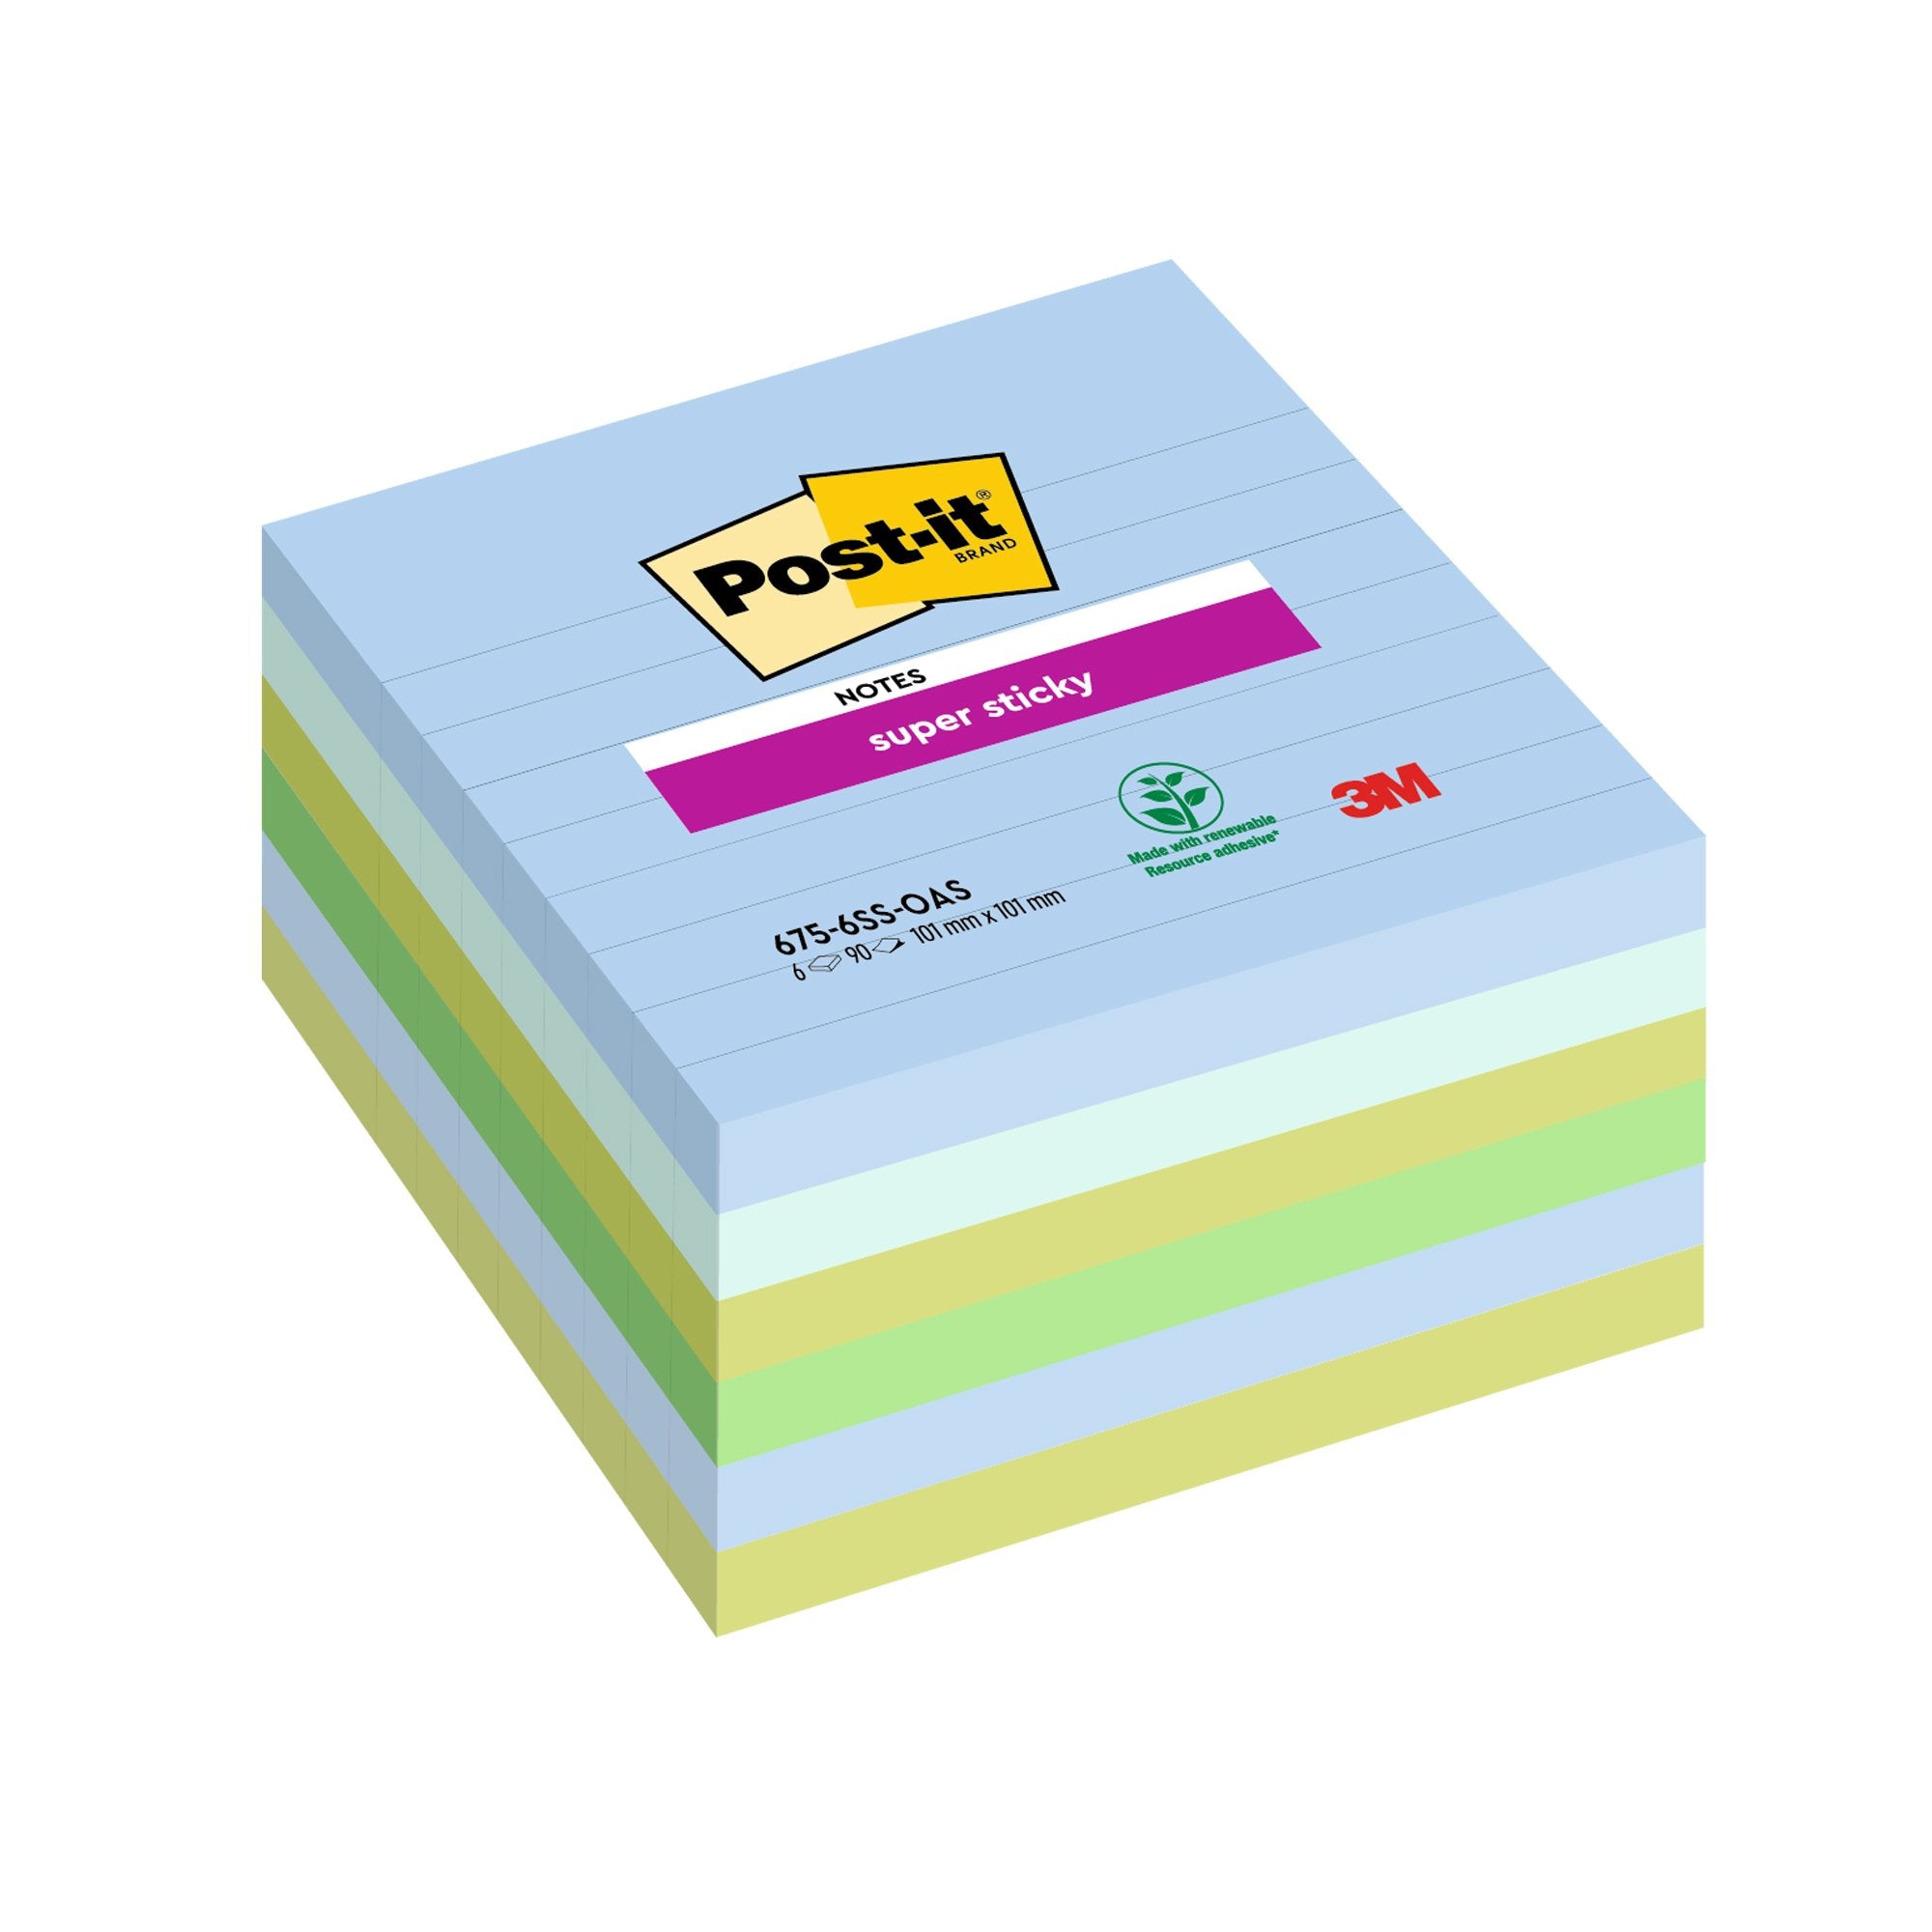 post-it-cf-6pz-blocco-90fg-super-sticky-100x100mm-righe-oasis-675-6ss-oas